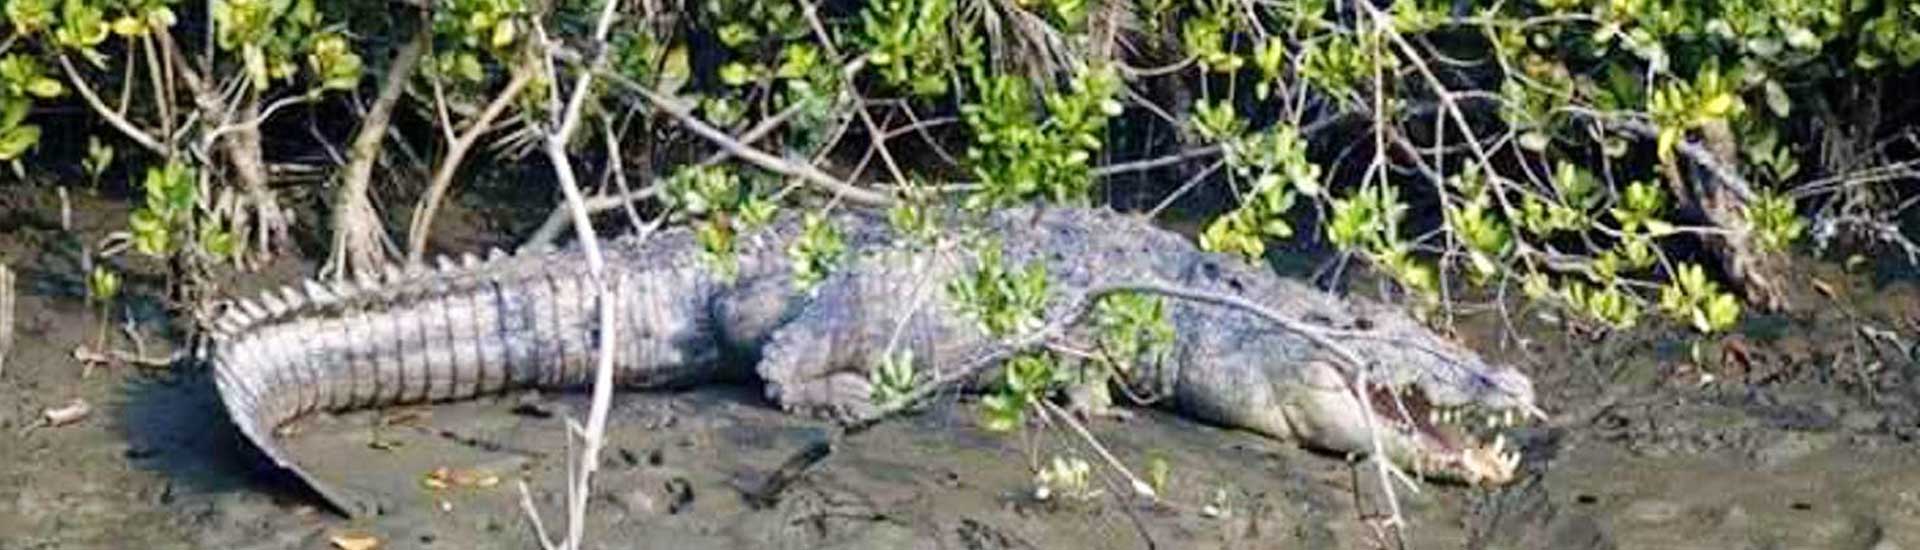 All You Need to Know about Bhagabatpur Crocodile Project